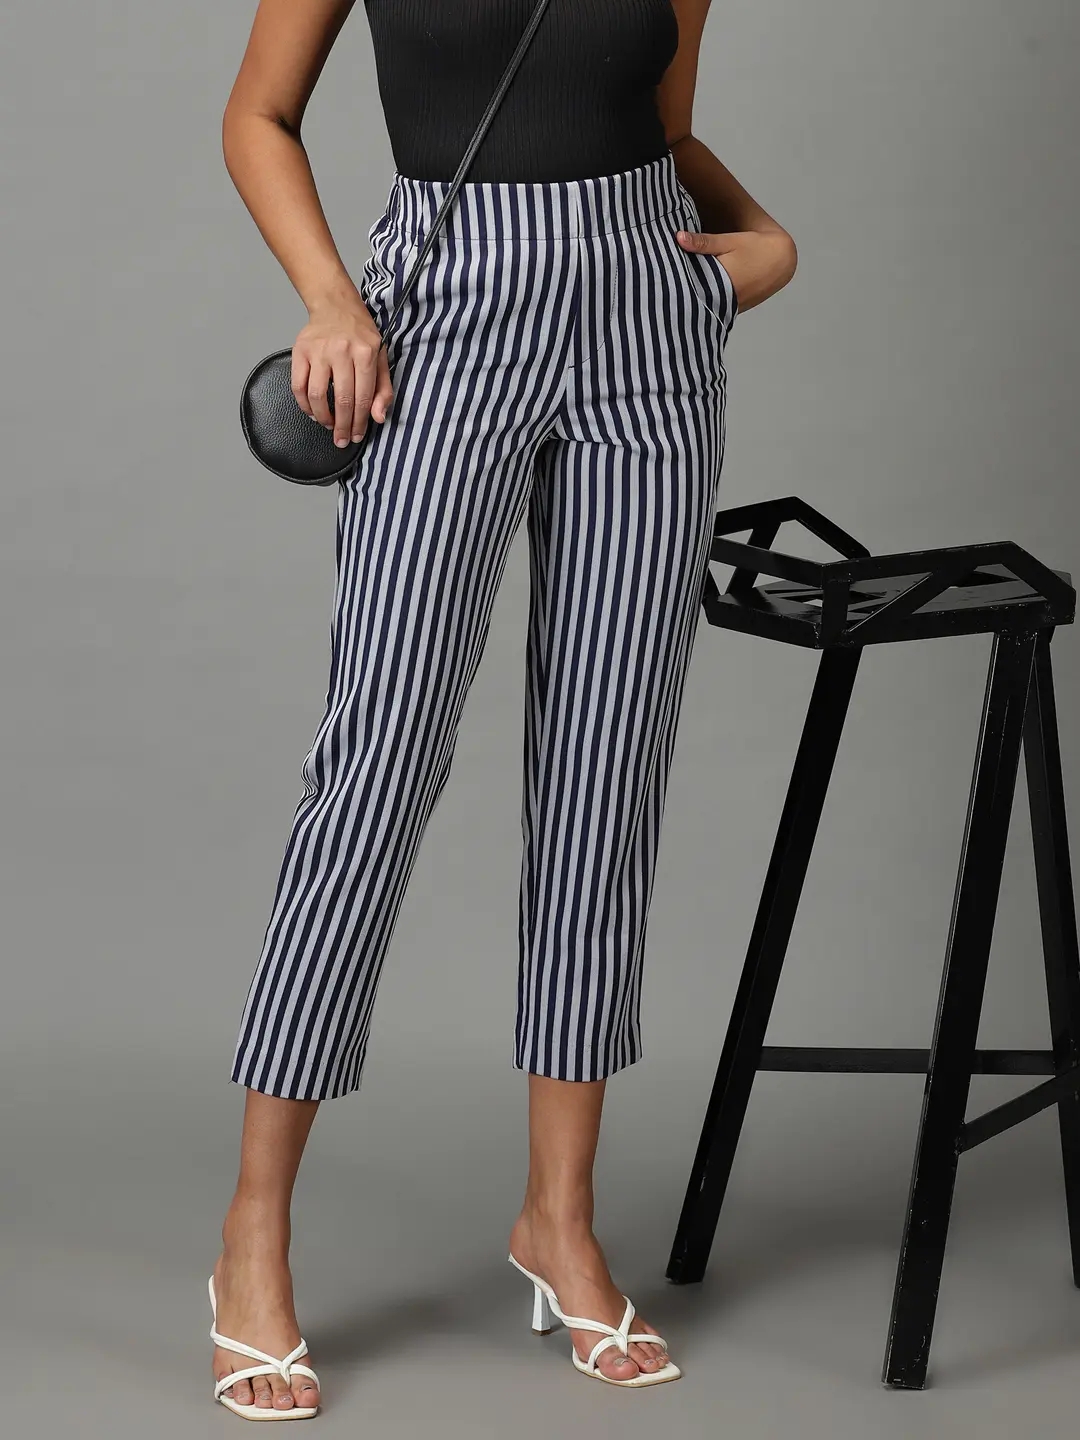 Women's Striped Trousers | Handwoven Naturally Dyed Merino Trousers